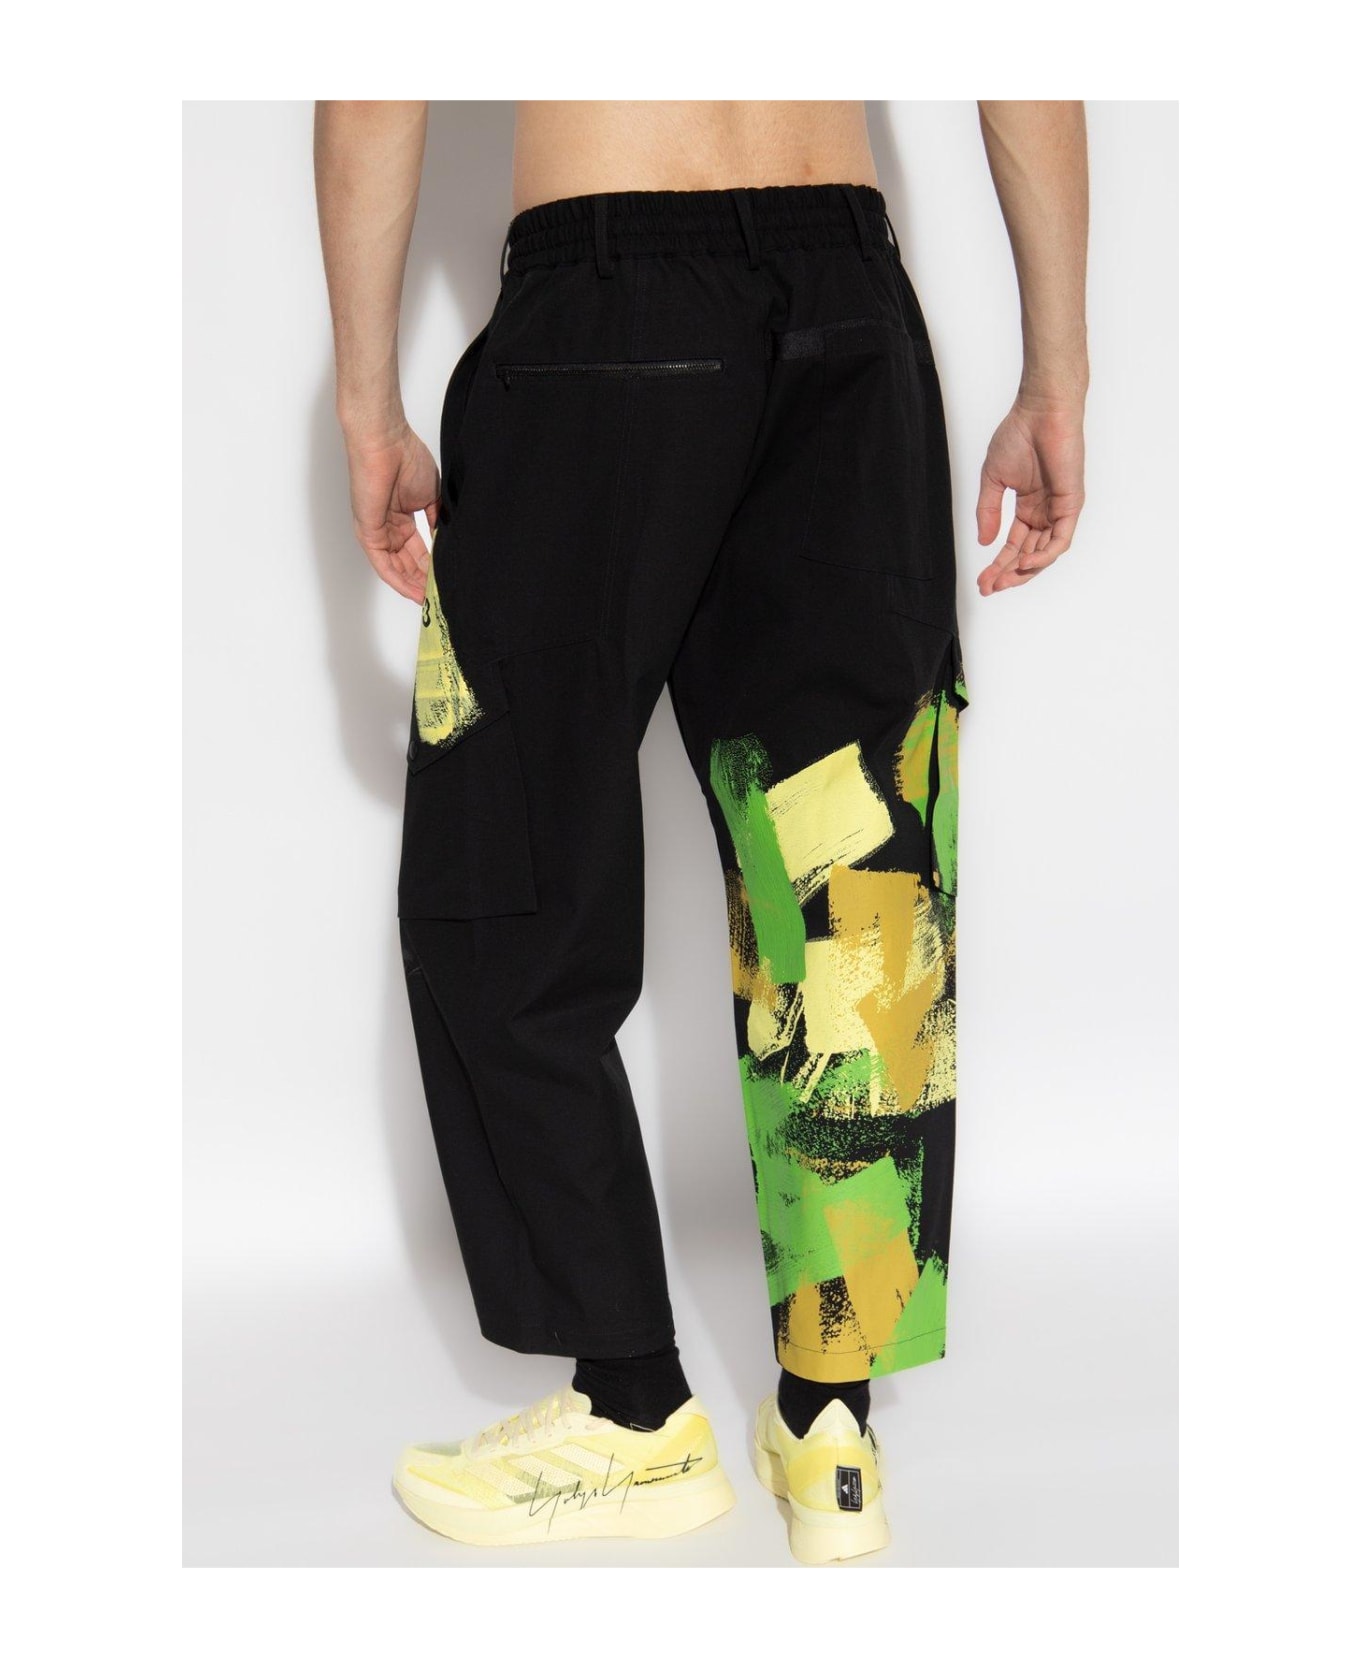 Y-3 Graphic Printed Cargo Trousers Pants - BLACK